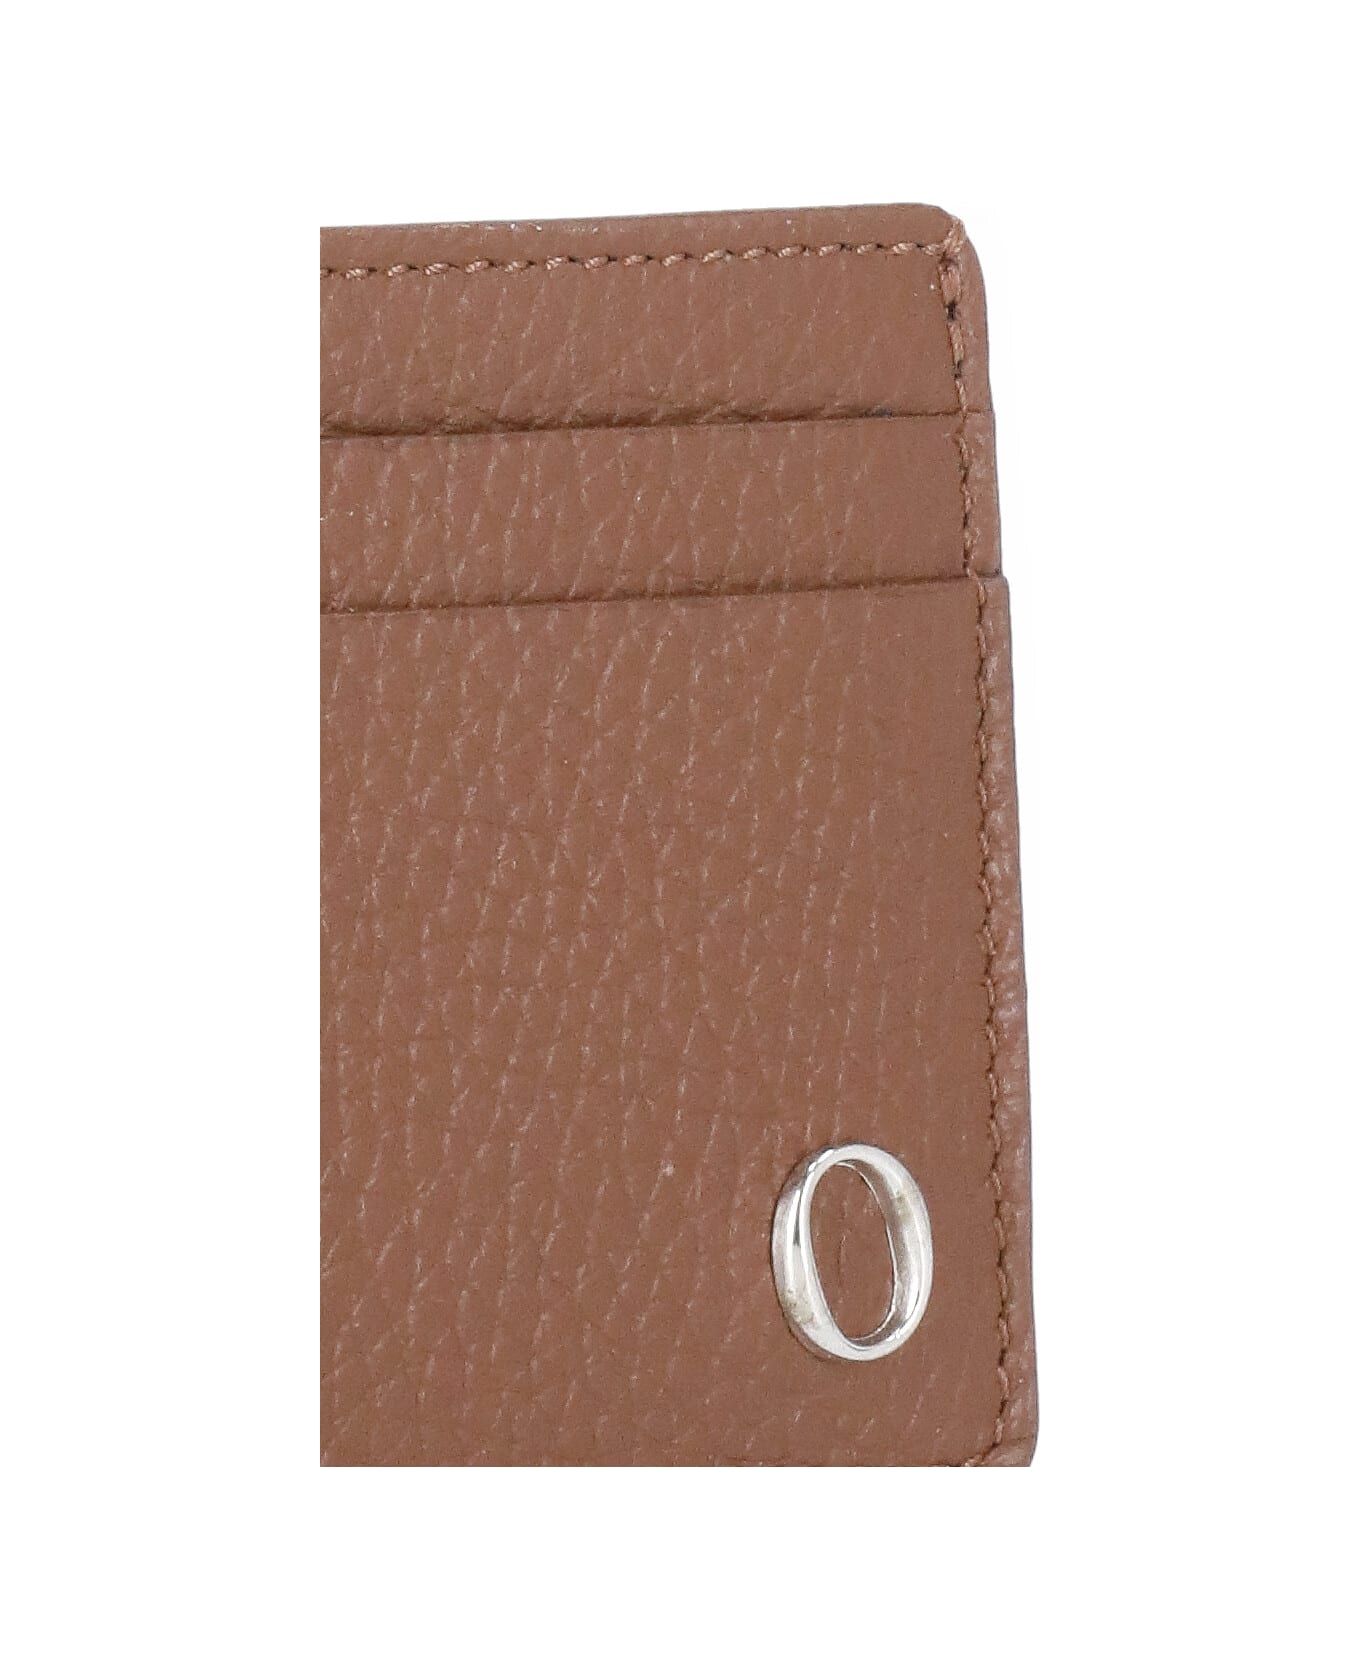 Orciani Micron Leather Cards Holder - Brown